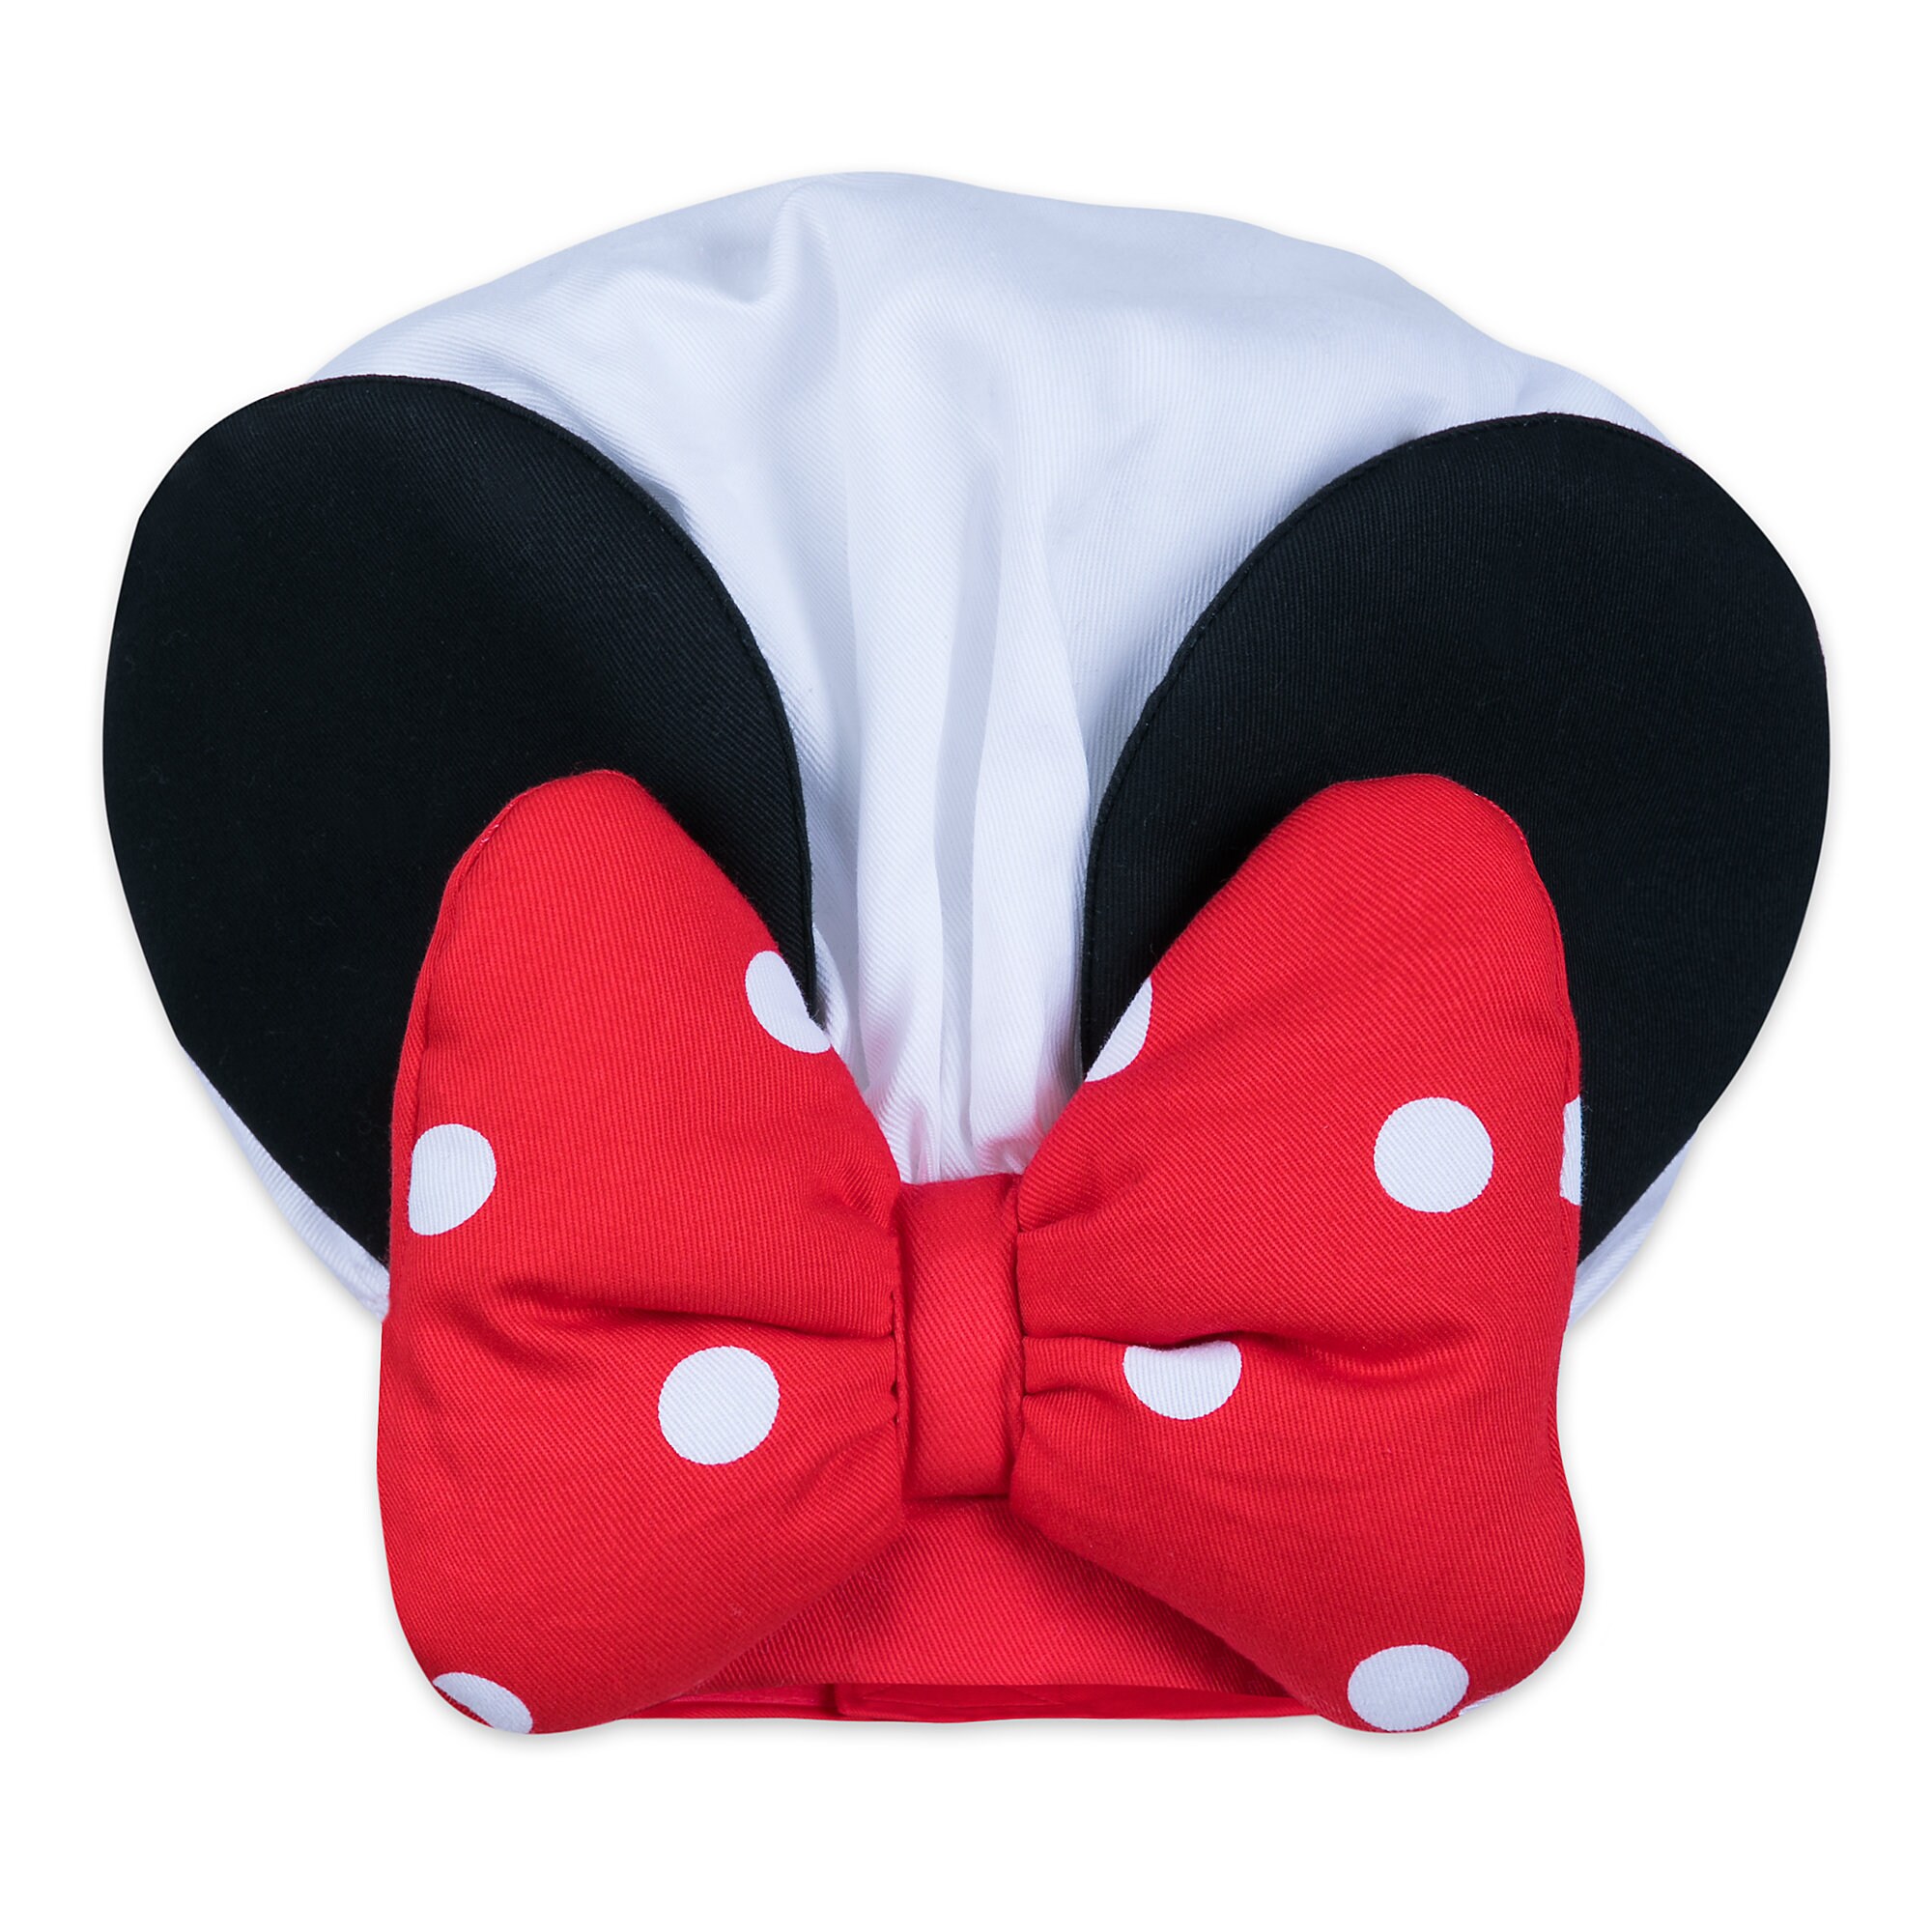 Minnie Mouse Signature Apron and Chef's Hat Set for Kids - Personalizable